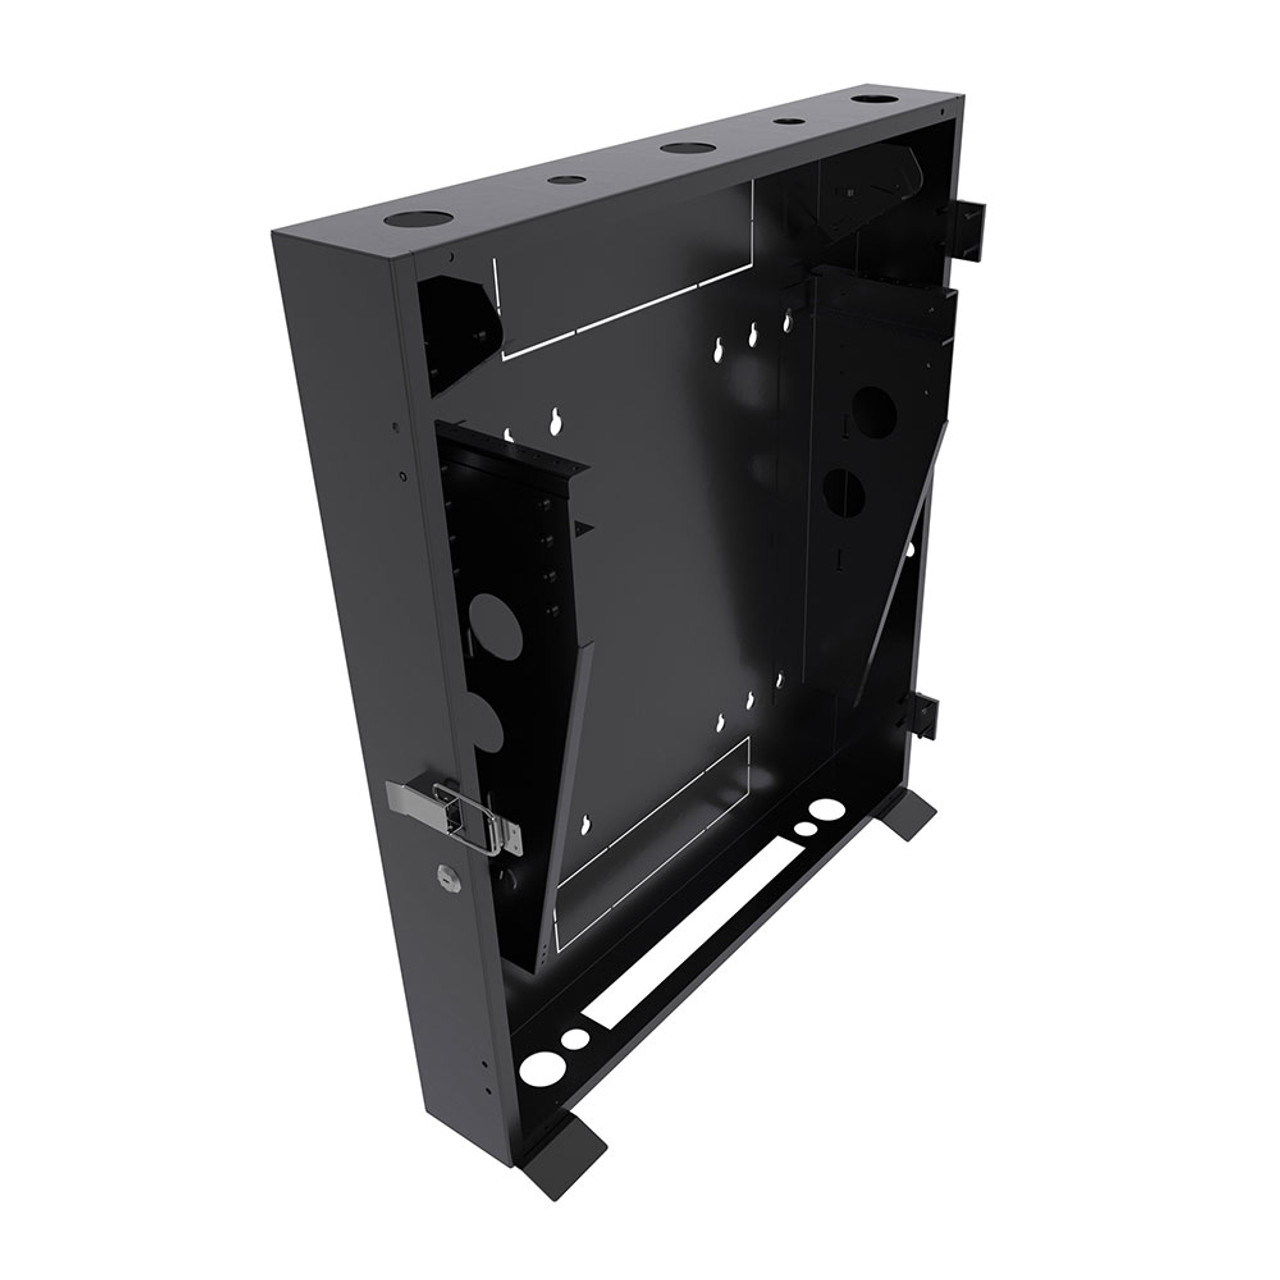 3U Vertical Wall Mount Enclosure, 16.7 inch (425mm) to 19.6 inch (500mm) depth, Cold-rolled Steel, Black